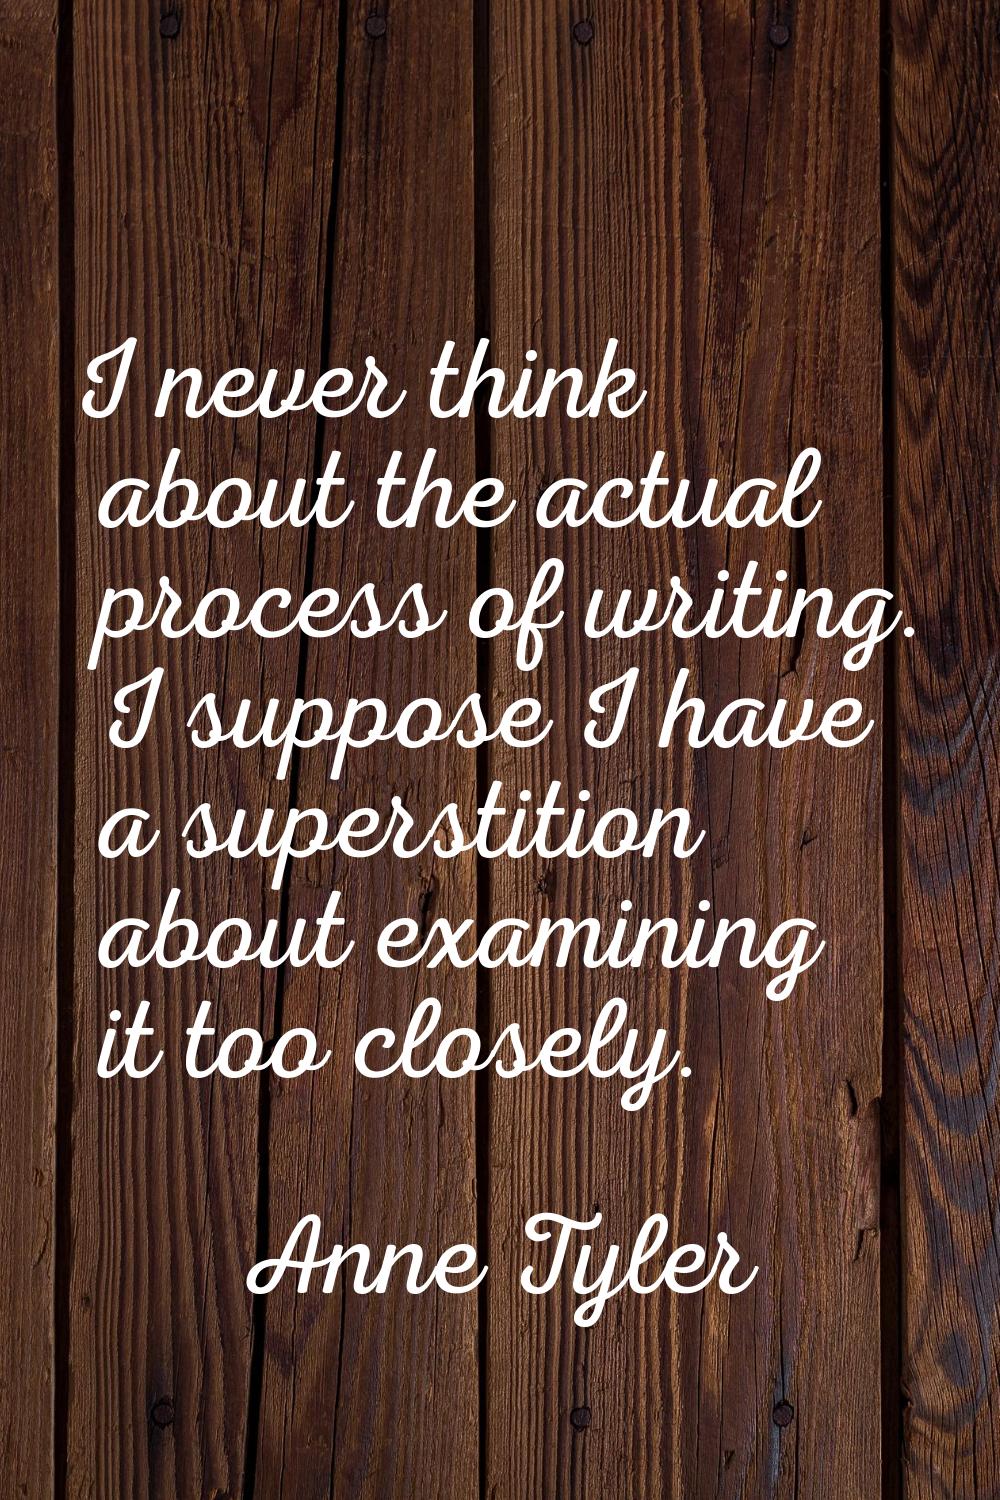 I never think about the actual process of writing. I suppose I have a superstition about examining 